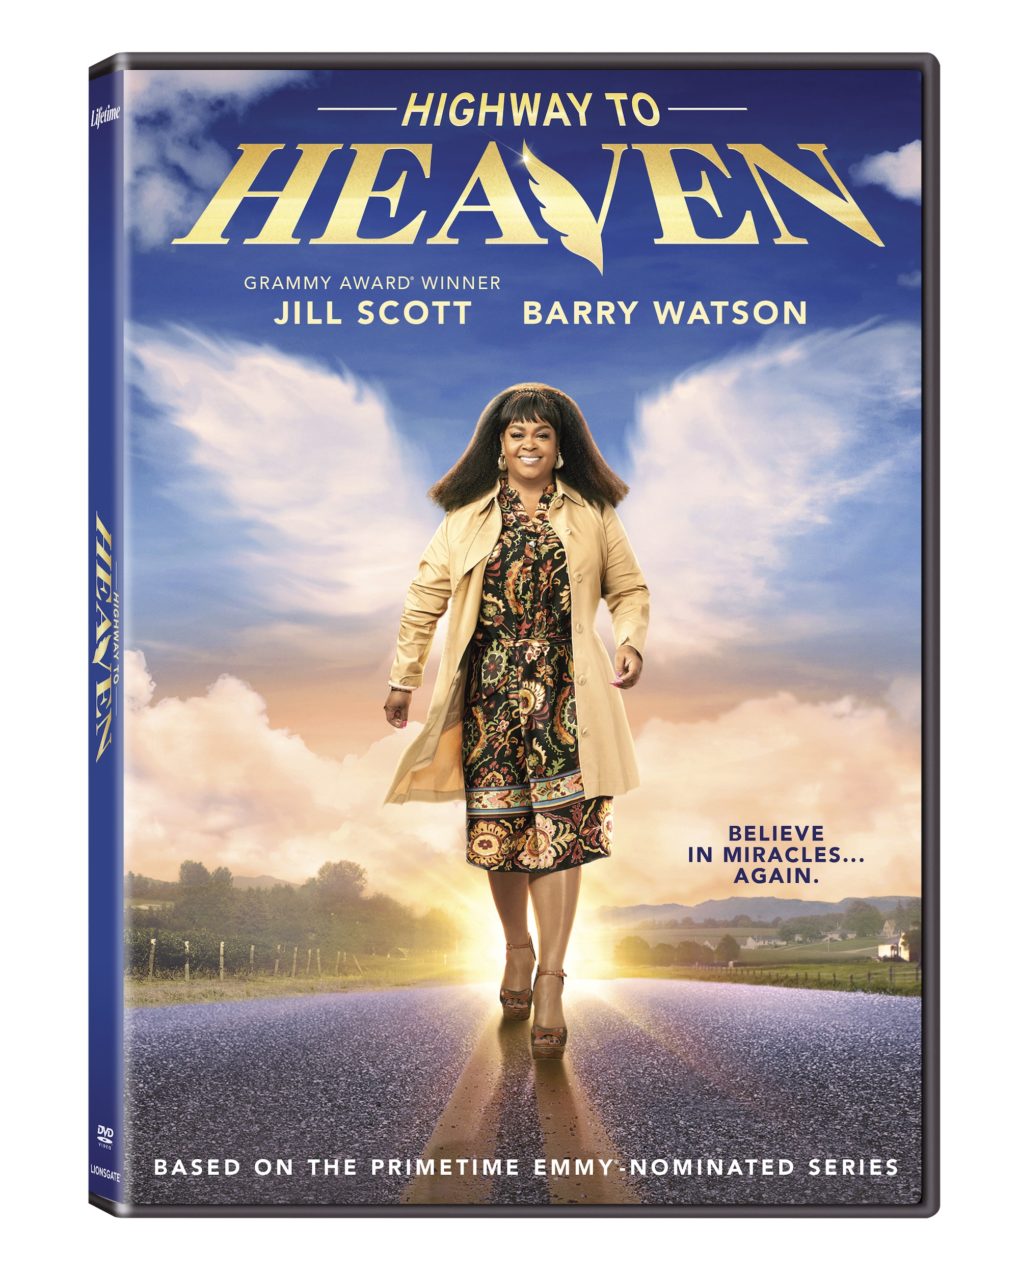 Highway To Heaven DVD cover (Lionsgate)